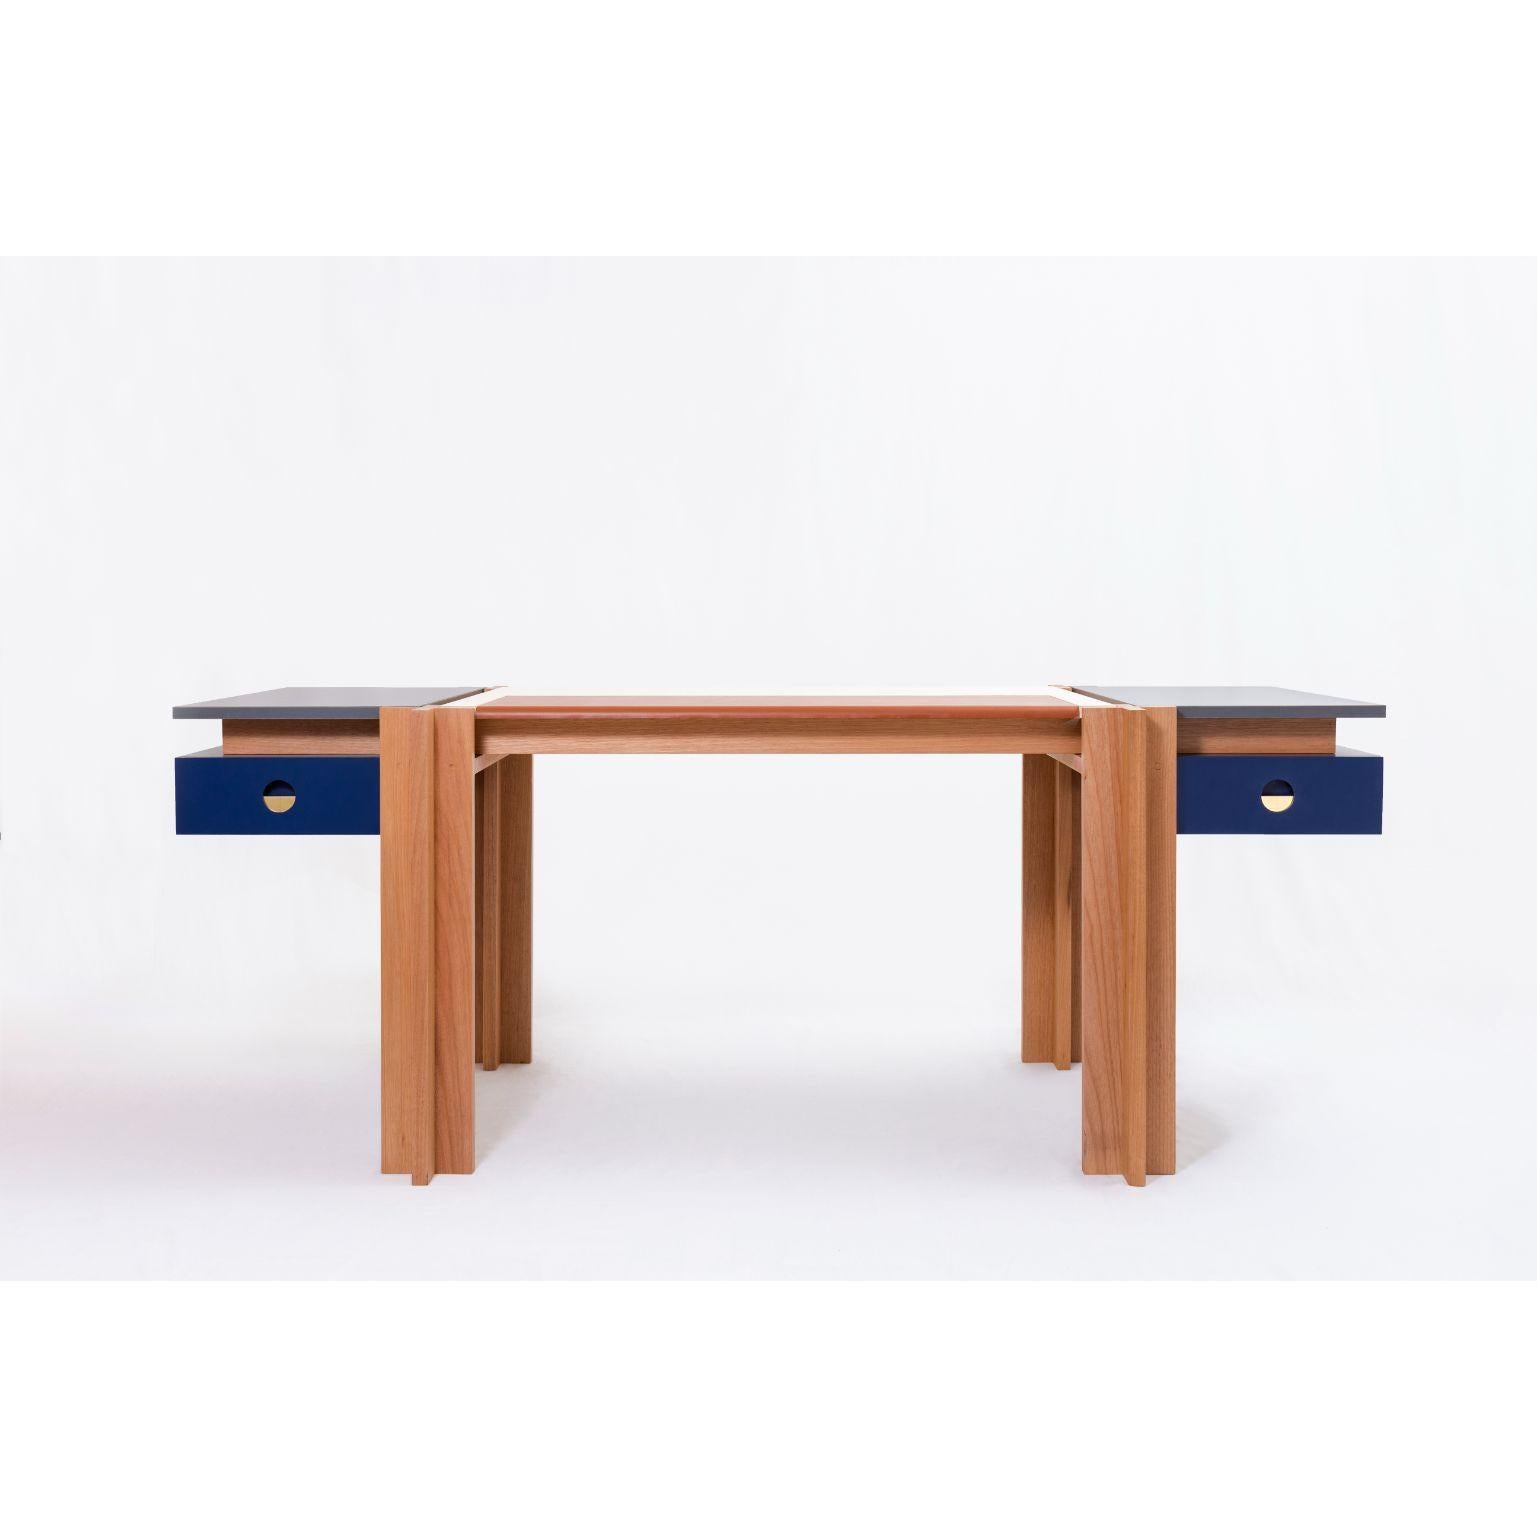 Mais - Desk by Alva Design
Materials: Wood, MDF, Formica, Leather details
Dimensions: 190 x 87 x 74 cm

ALVA is a furniture and objects design office, formed by brothers Susana Bastos, artist and designer, and Marcelo Alvarenga, architect. Their